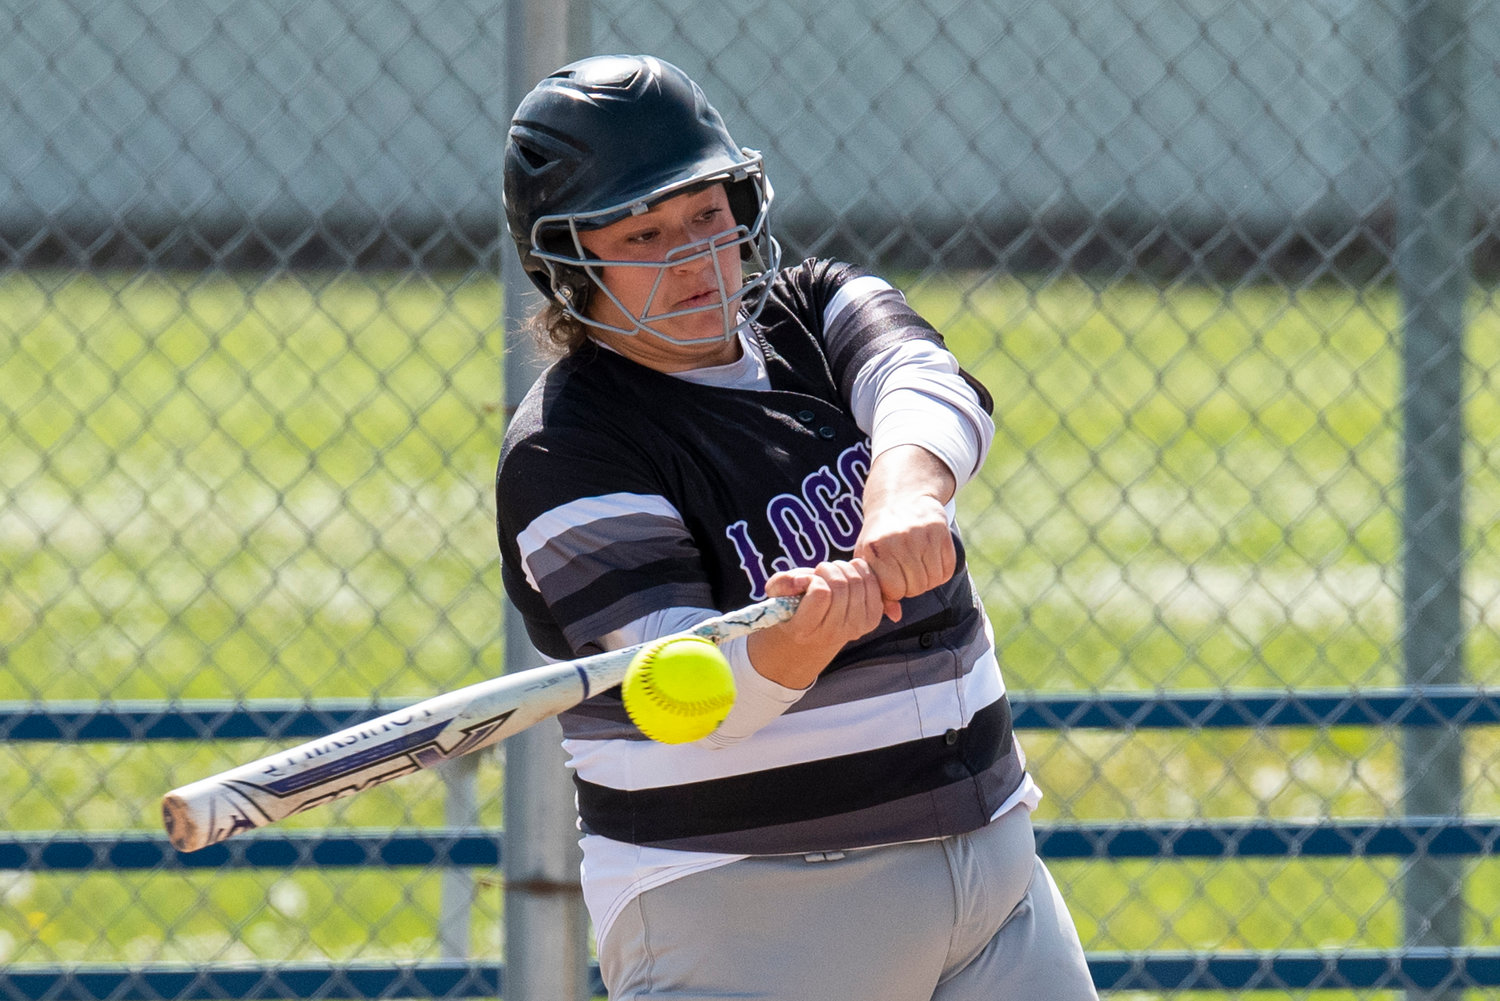 Onalaska's Alex Cleveland-Barrera lines up an Adna pitch during a road game on May 4. Cleveland-Barrera was named a Chronicle All-Area selection after a strong 2022 season.